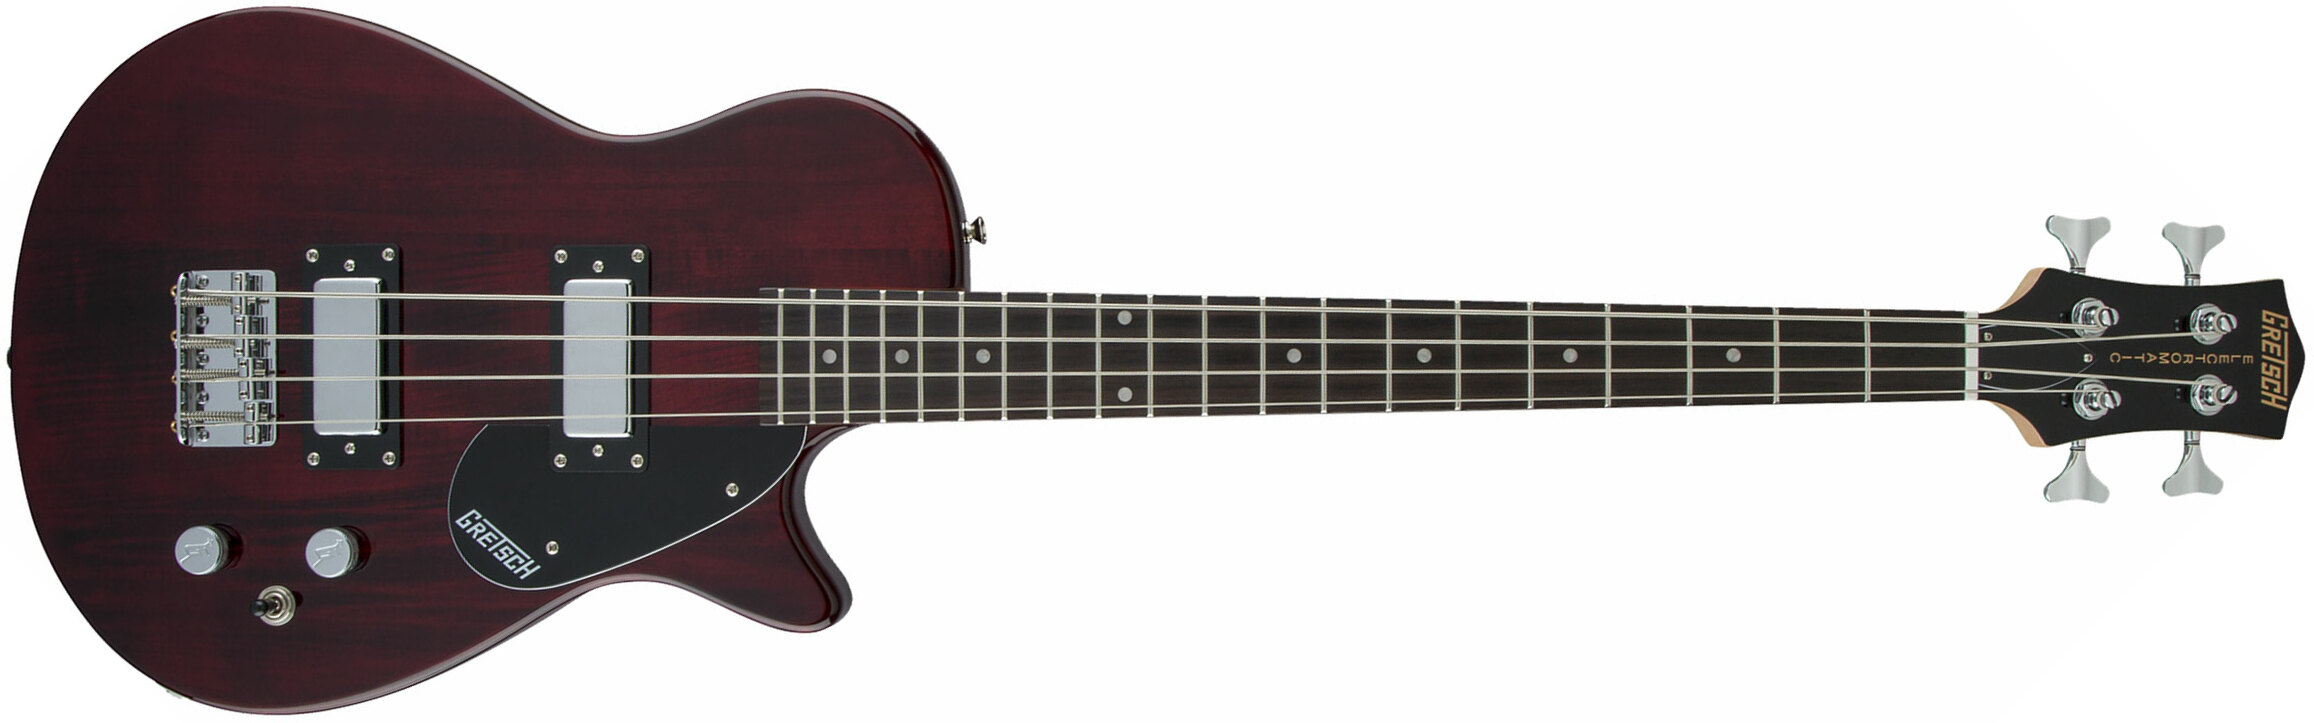 Gretsch G2220 Junior Jet Bass Ii Short Scale Electromatic Wal - Walnut Stain - Electric bass for kids - Main picture